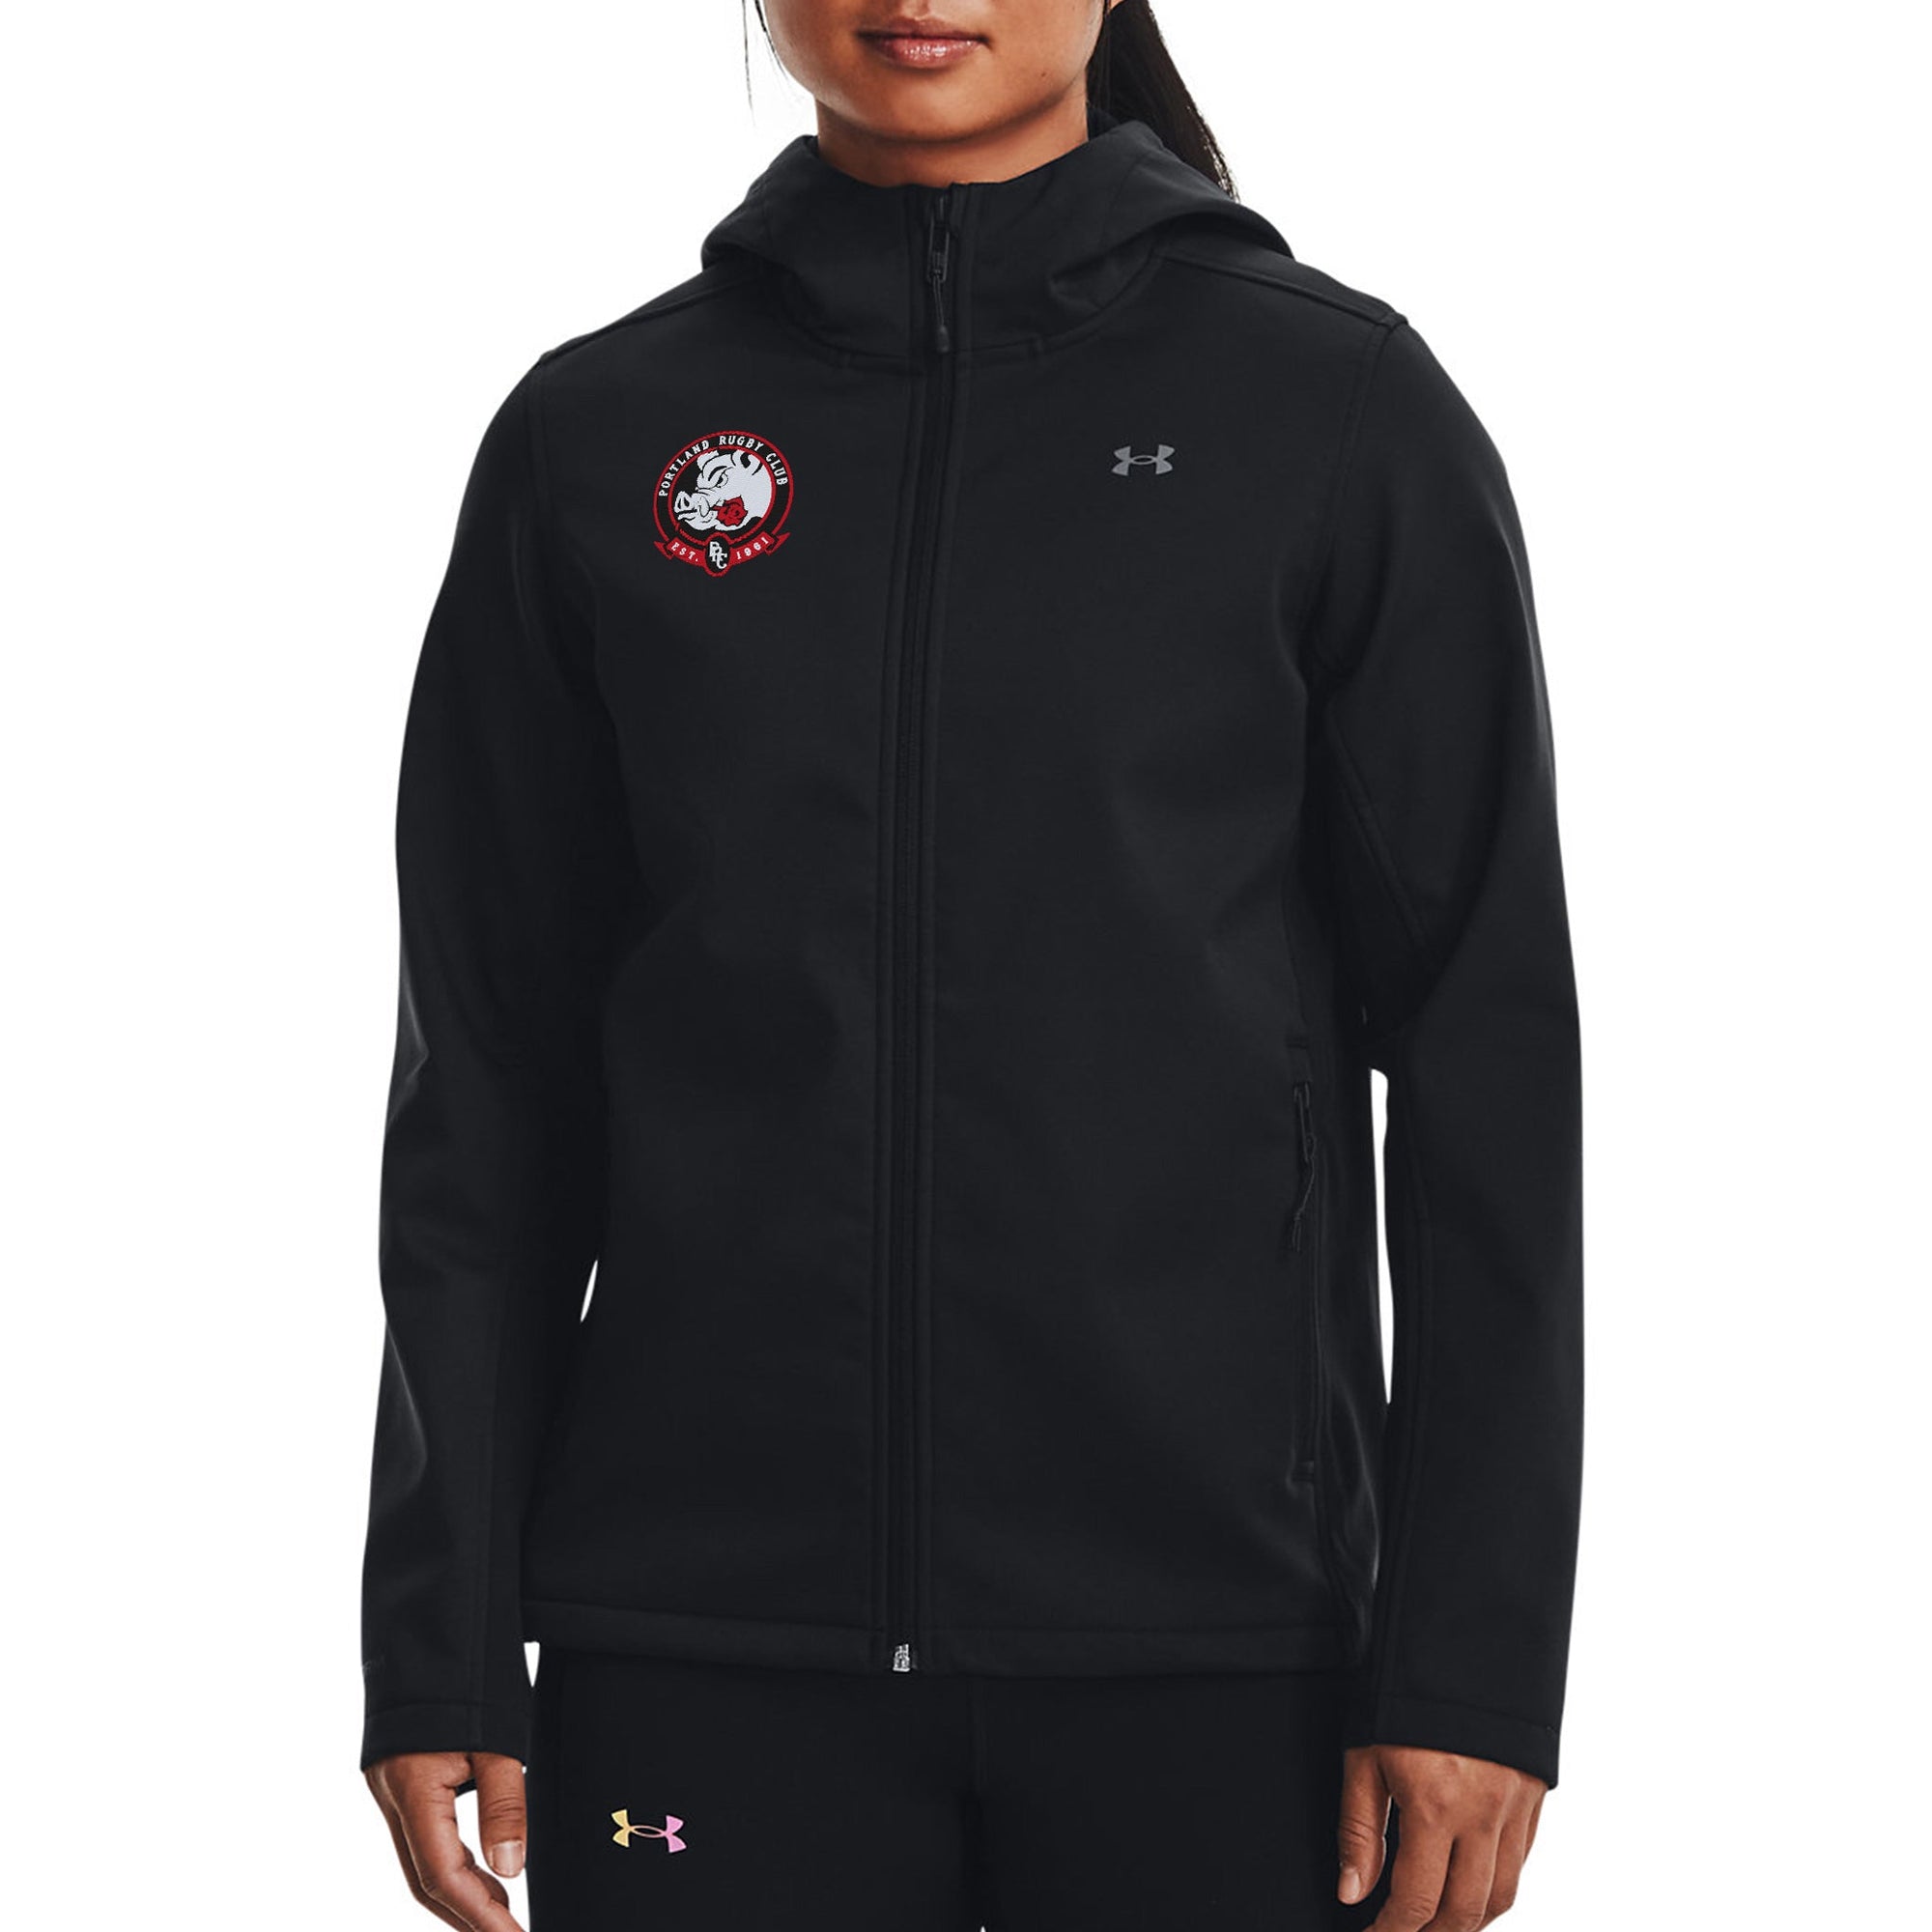 Rugby Imports Portland Pigs Women's Coldgear Hooded Infrared Jacket